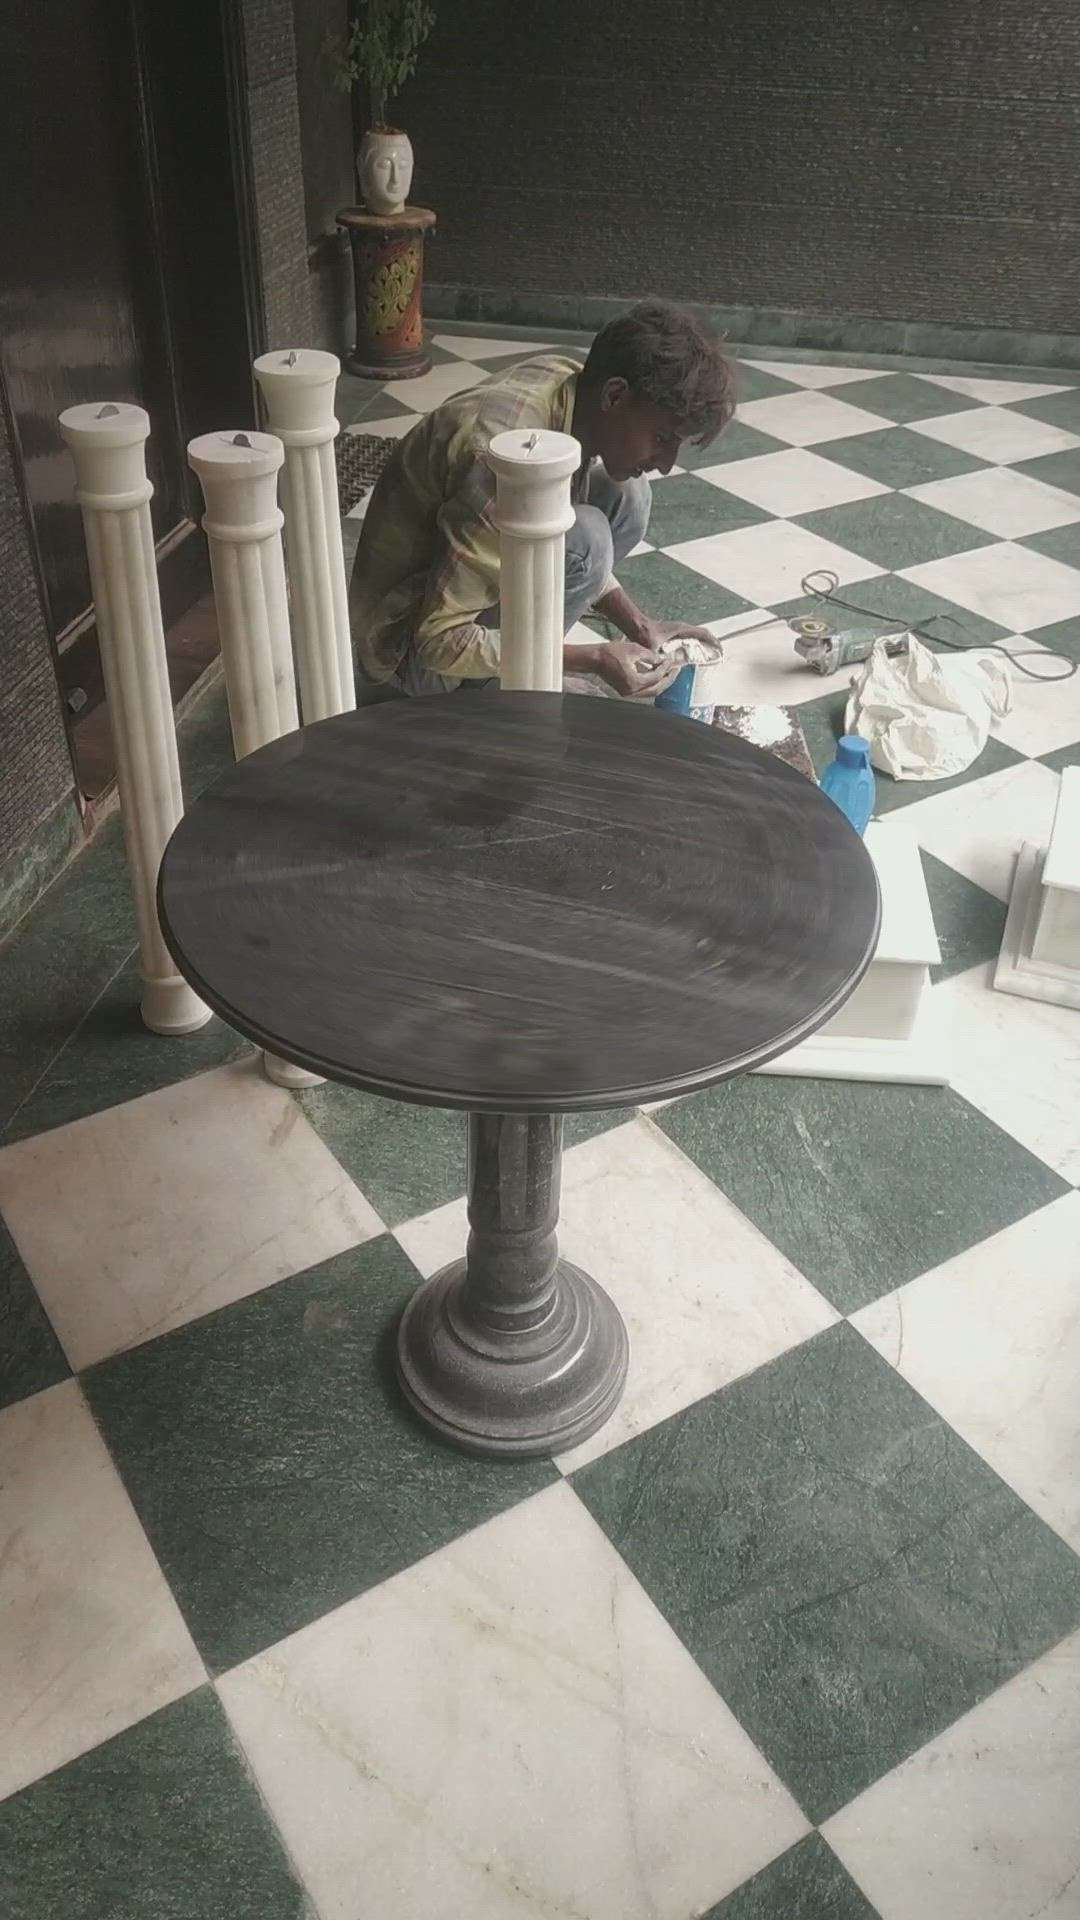 revolving round table.
all types marble available.
for more information WhatsApp.9710053652.
 #kolopost  #viral2022  #viralreels  #Marblequarry  #sangemarmarmarble  #SandStone  #marblegranite  #koloapp